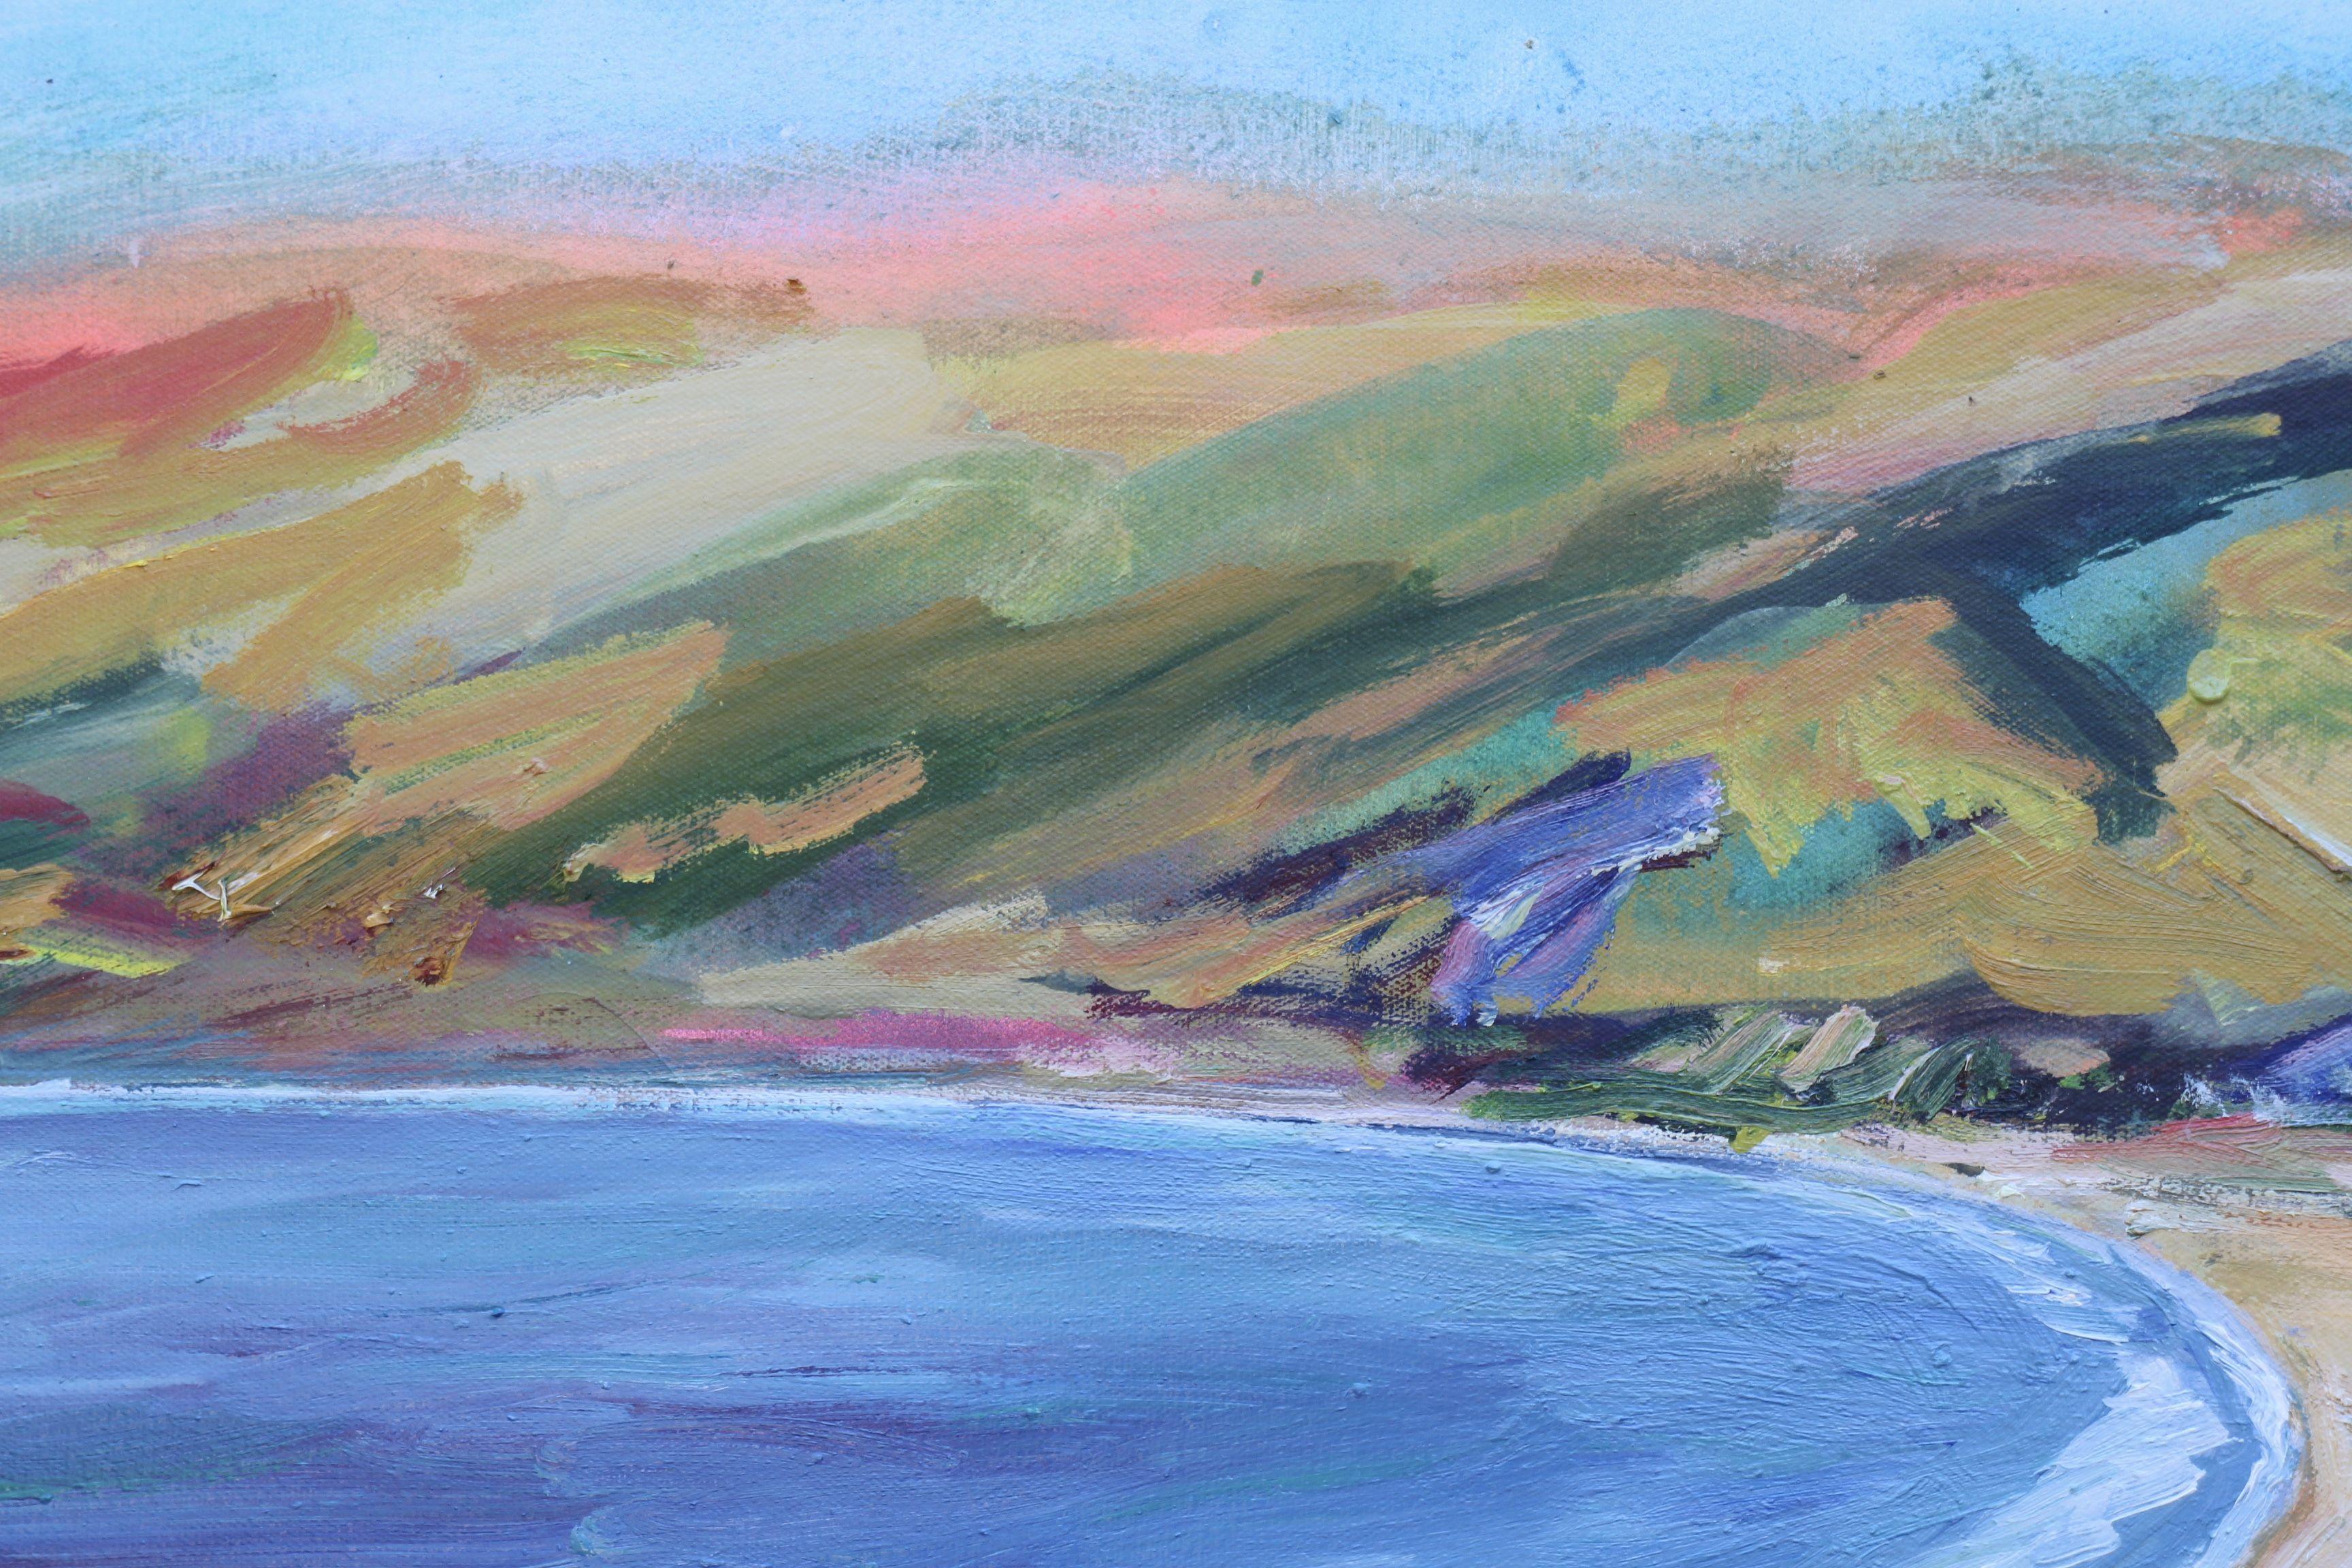 Painted in my studio based off of a plein air oil painting I did of this location (Zuma Beach, Malibu, California). Spray paint, Acrylic and Oils on Canvas. :: Painting :: Impressionist :: This piece comes with an official certificate of